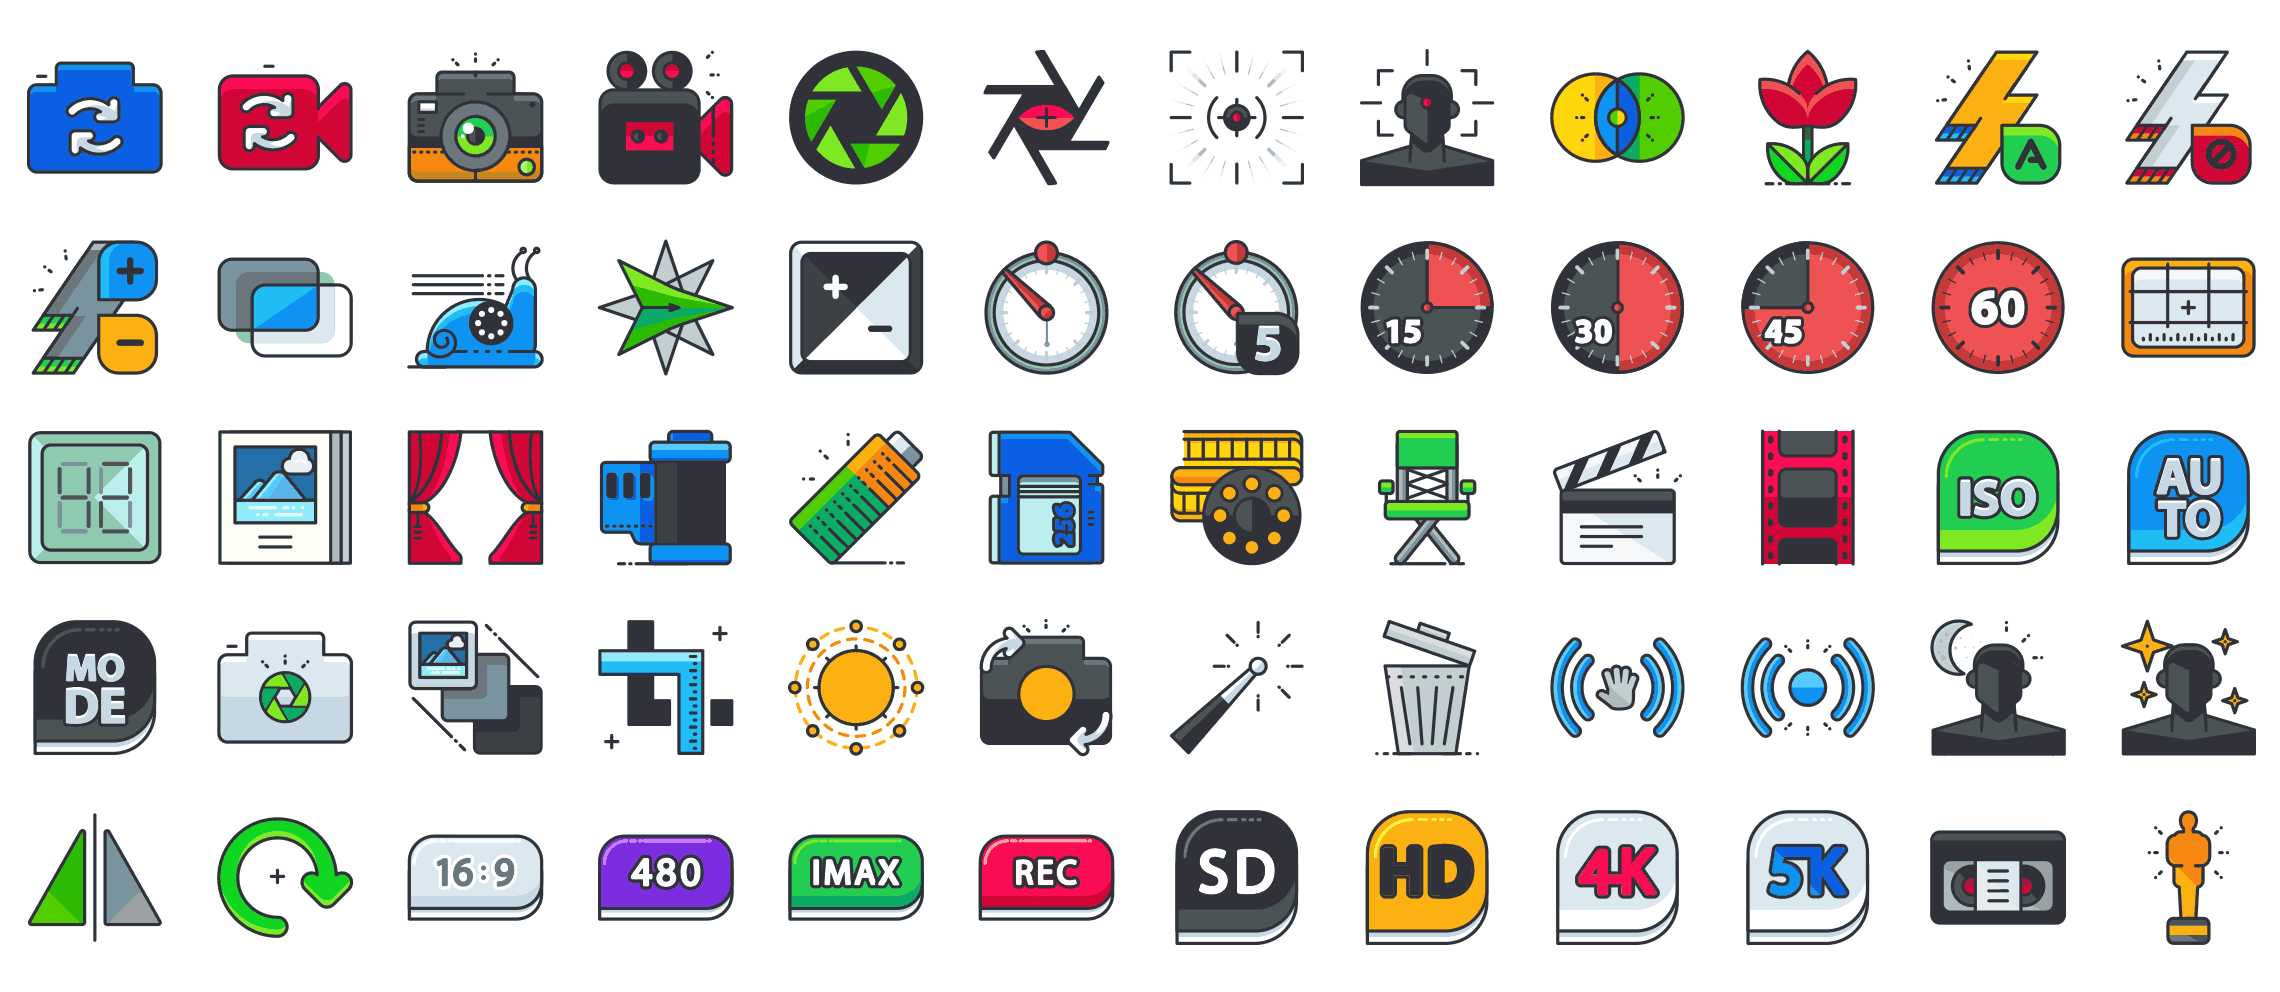 Photo-and-Video-UI-outline-icons